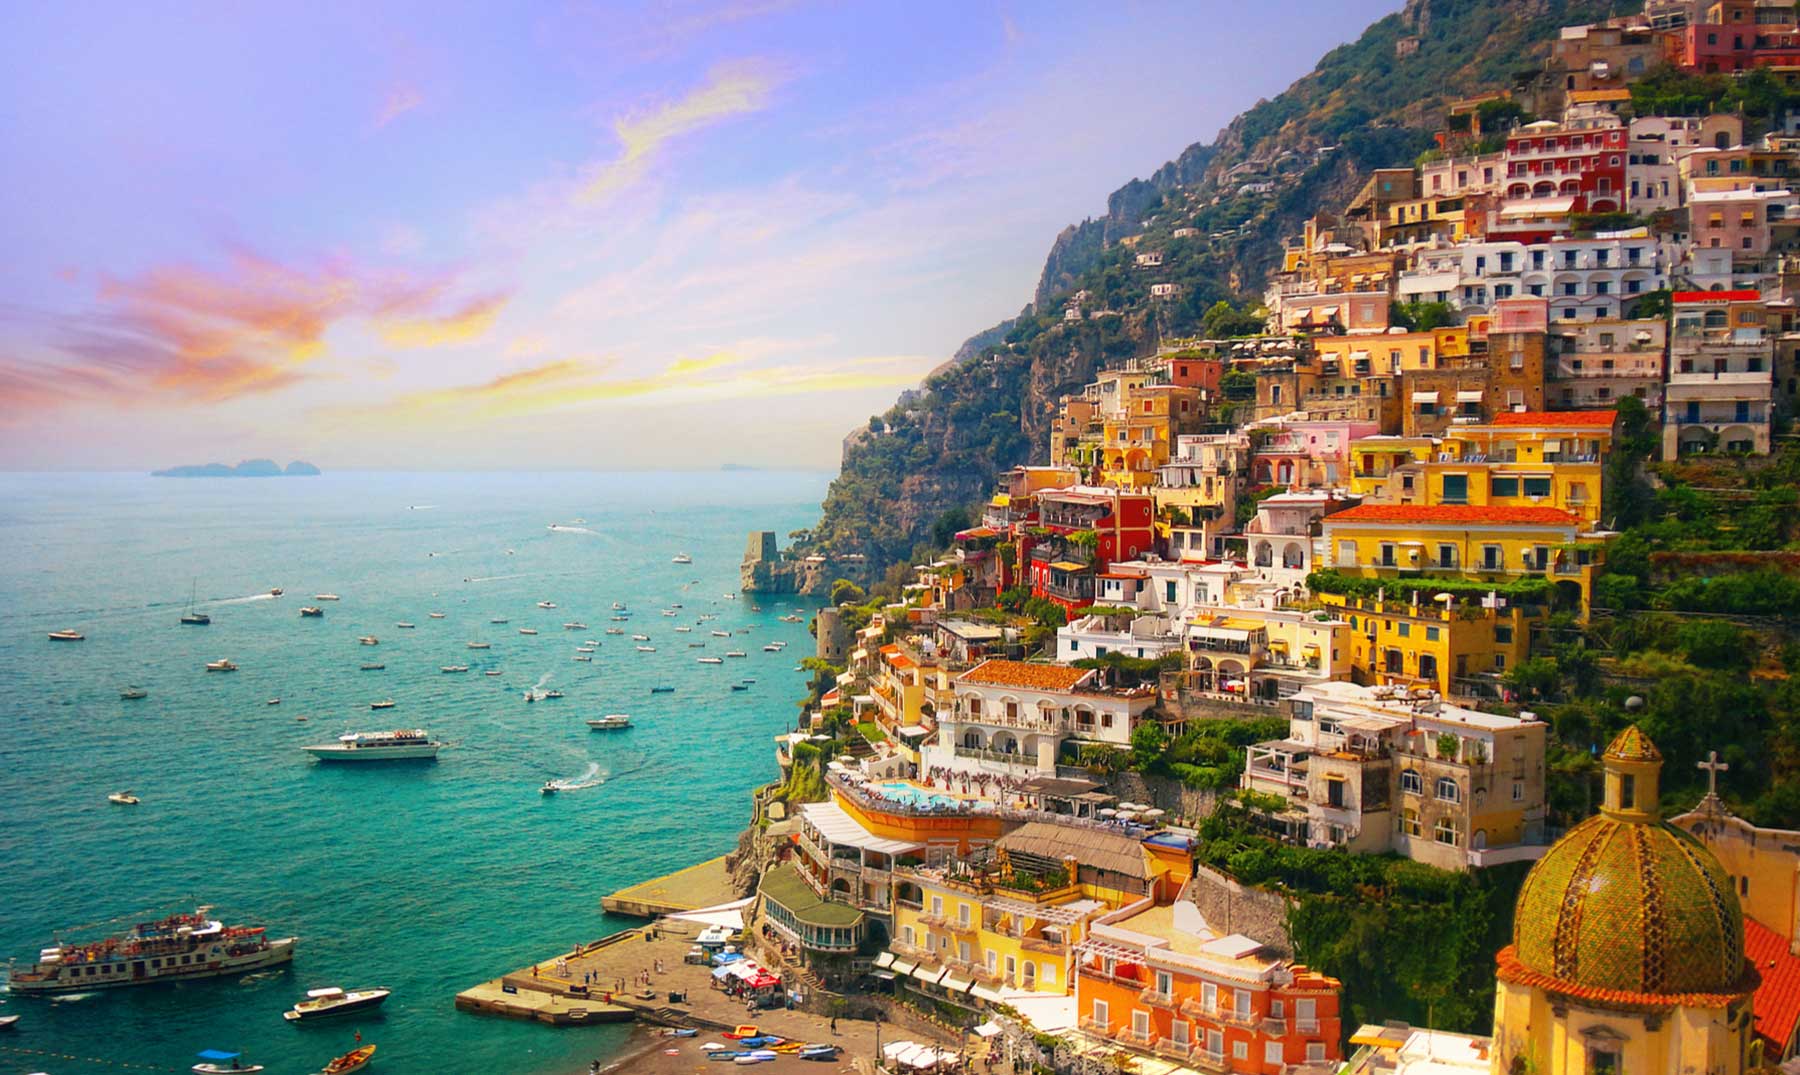 places to visit in positano italy